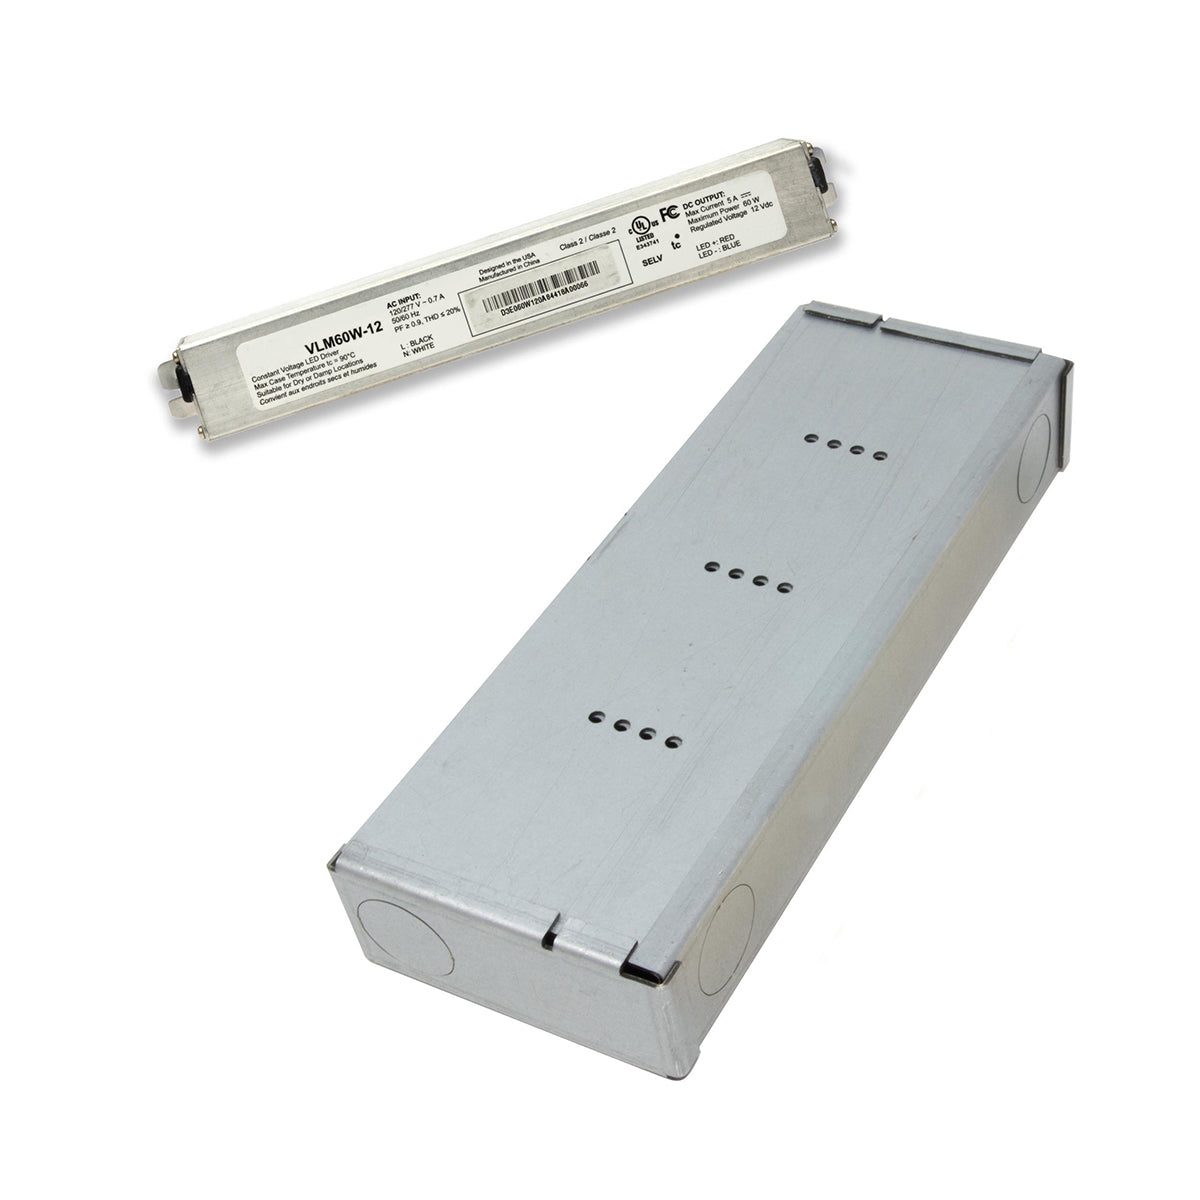 VLM 96 Watts 24VDC LED Driver with Lo-Pro Junction Box, PWM Dimming, 120-277V - Bees Lighting